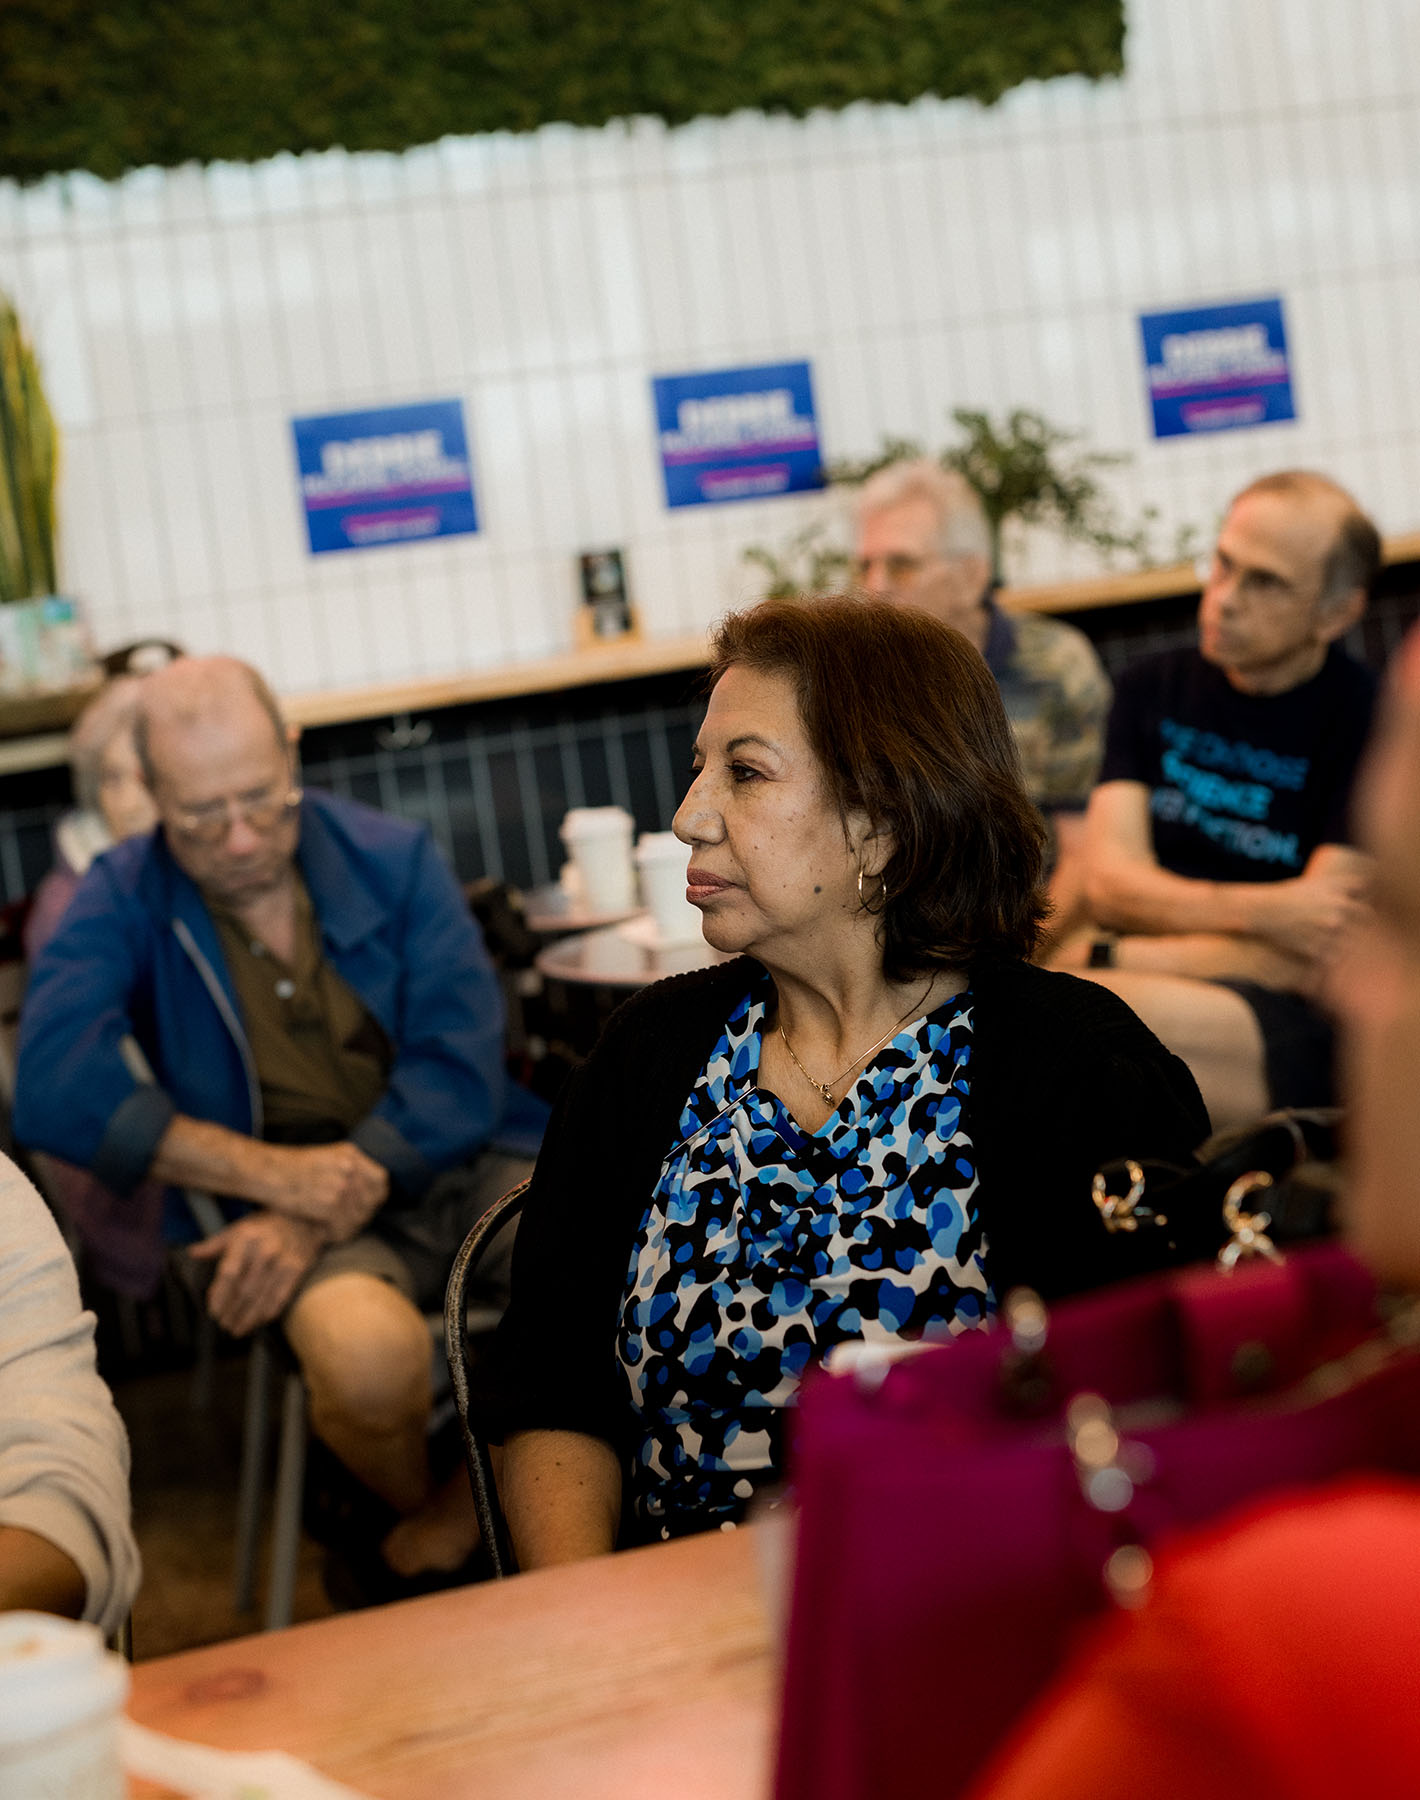 A woman listens as Debbie-Mucarsel-Powell speaks to a crowd in a coffee shop.